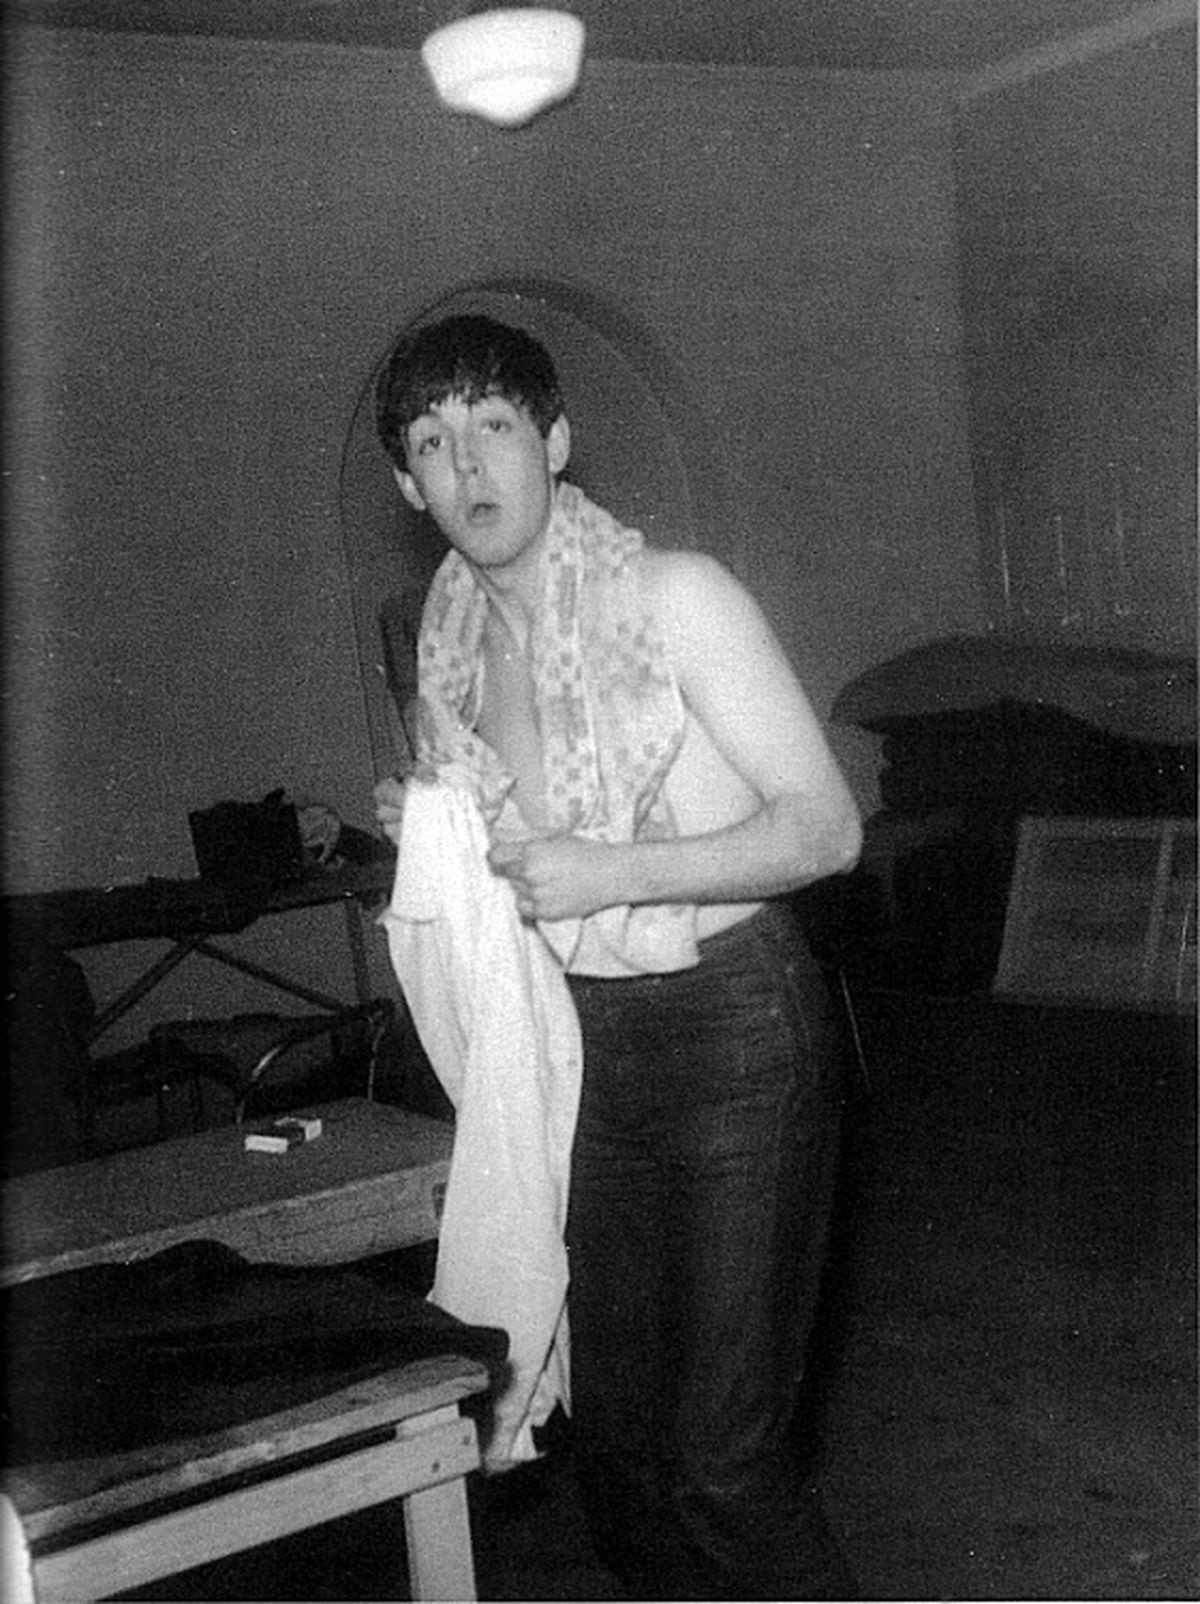 Macca towels down after the Music Hall show.